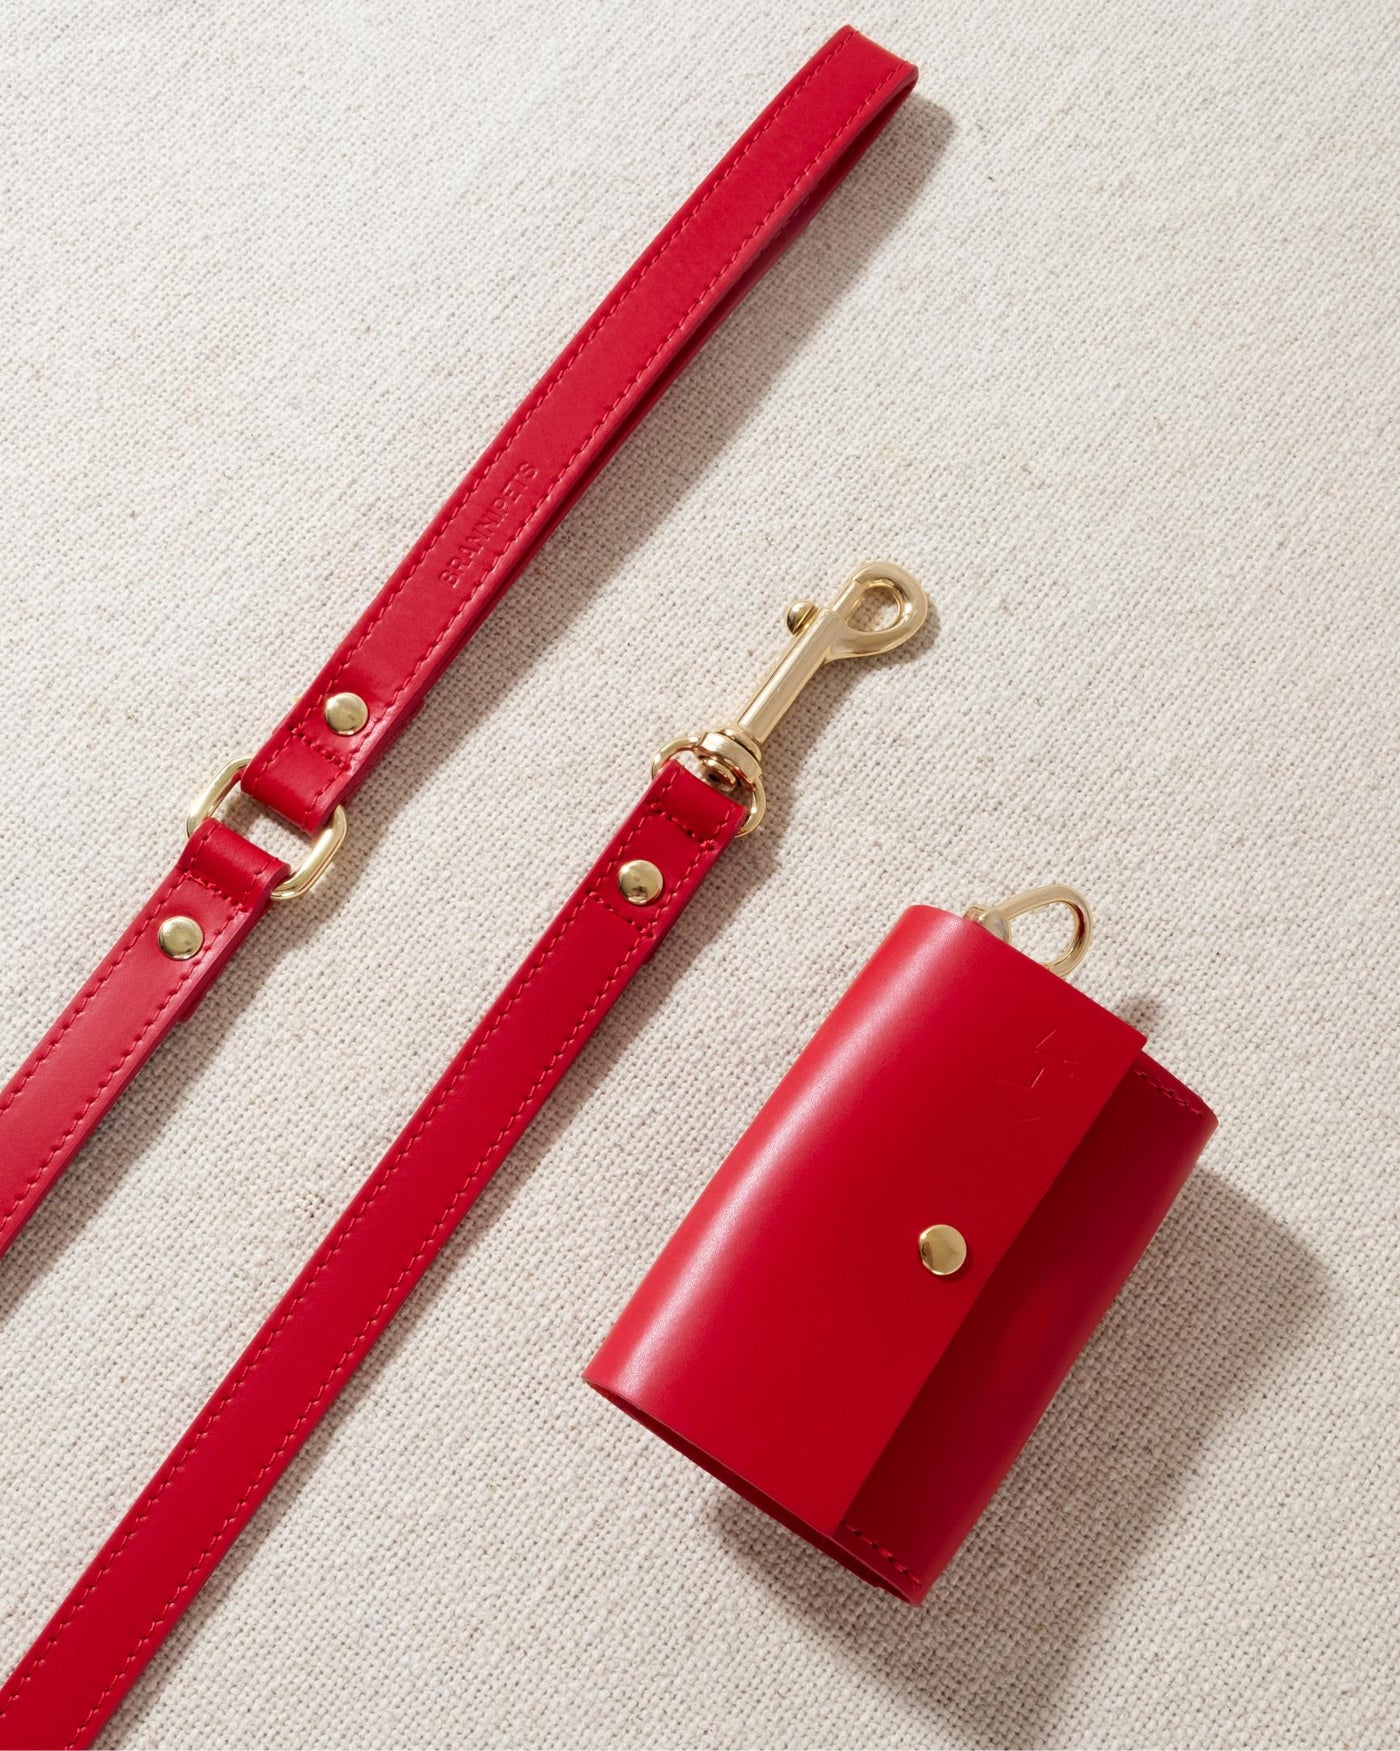 red leather dog leash with gold accents